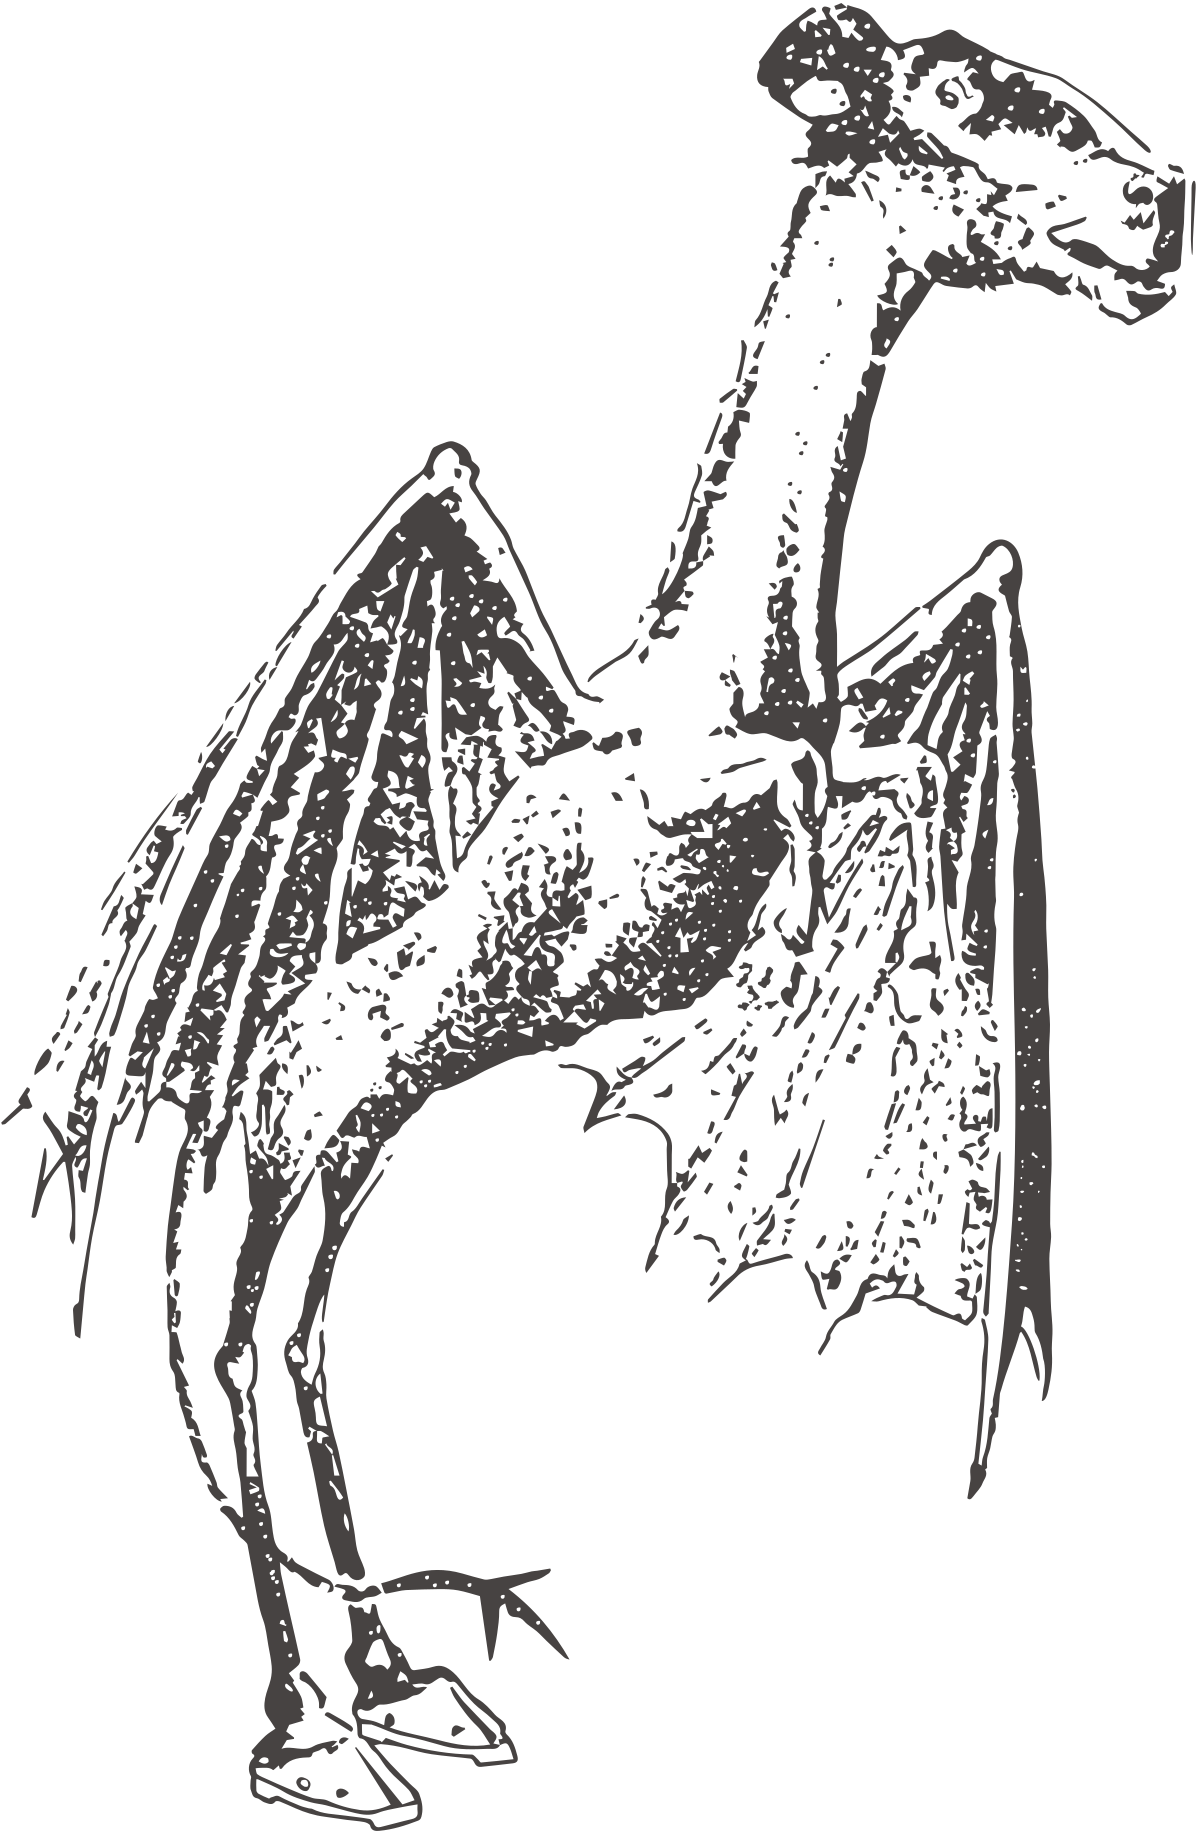 Is the Jersey Devil a genuine threat?